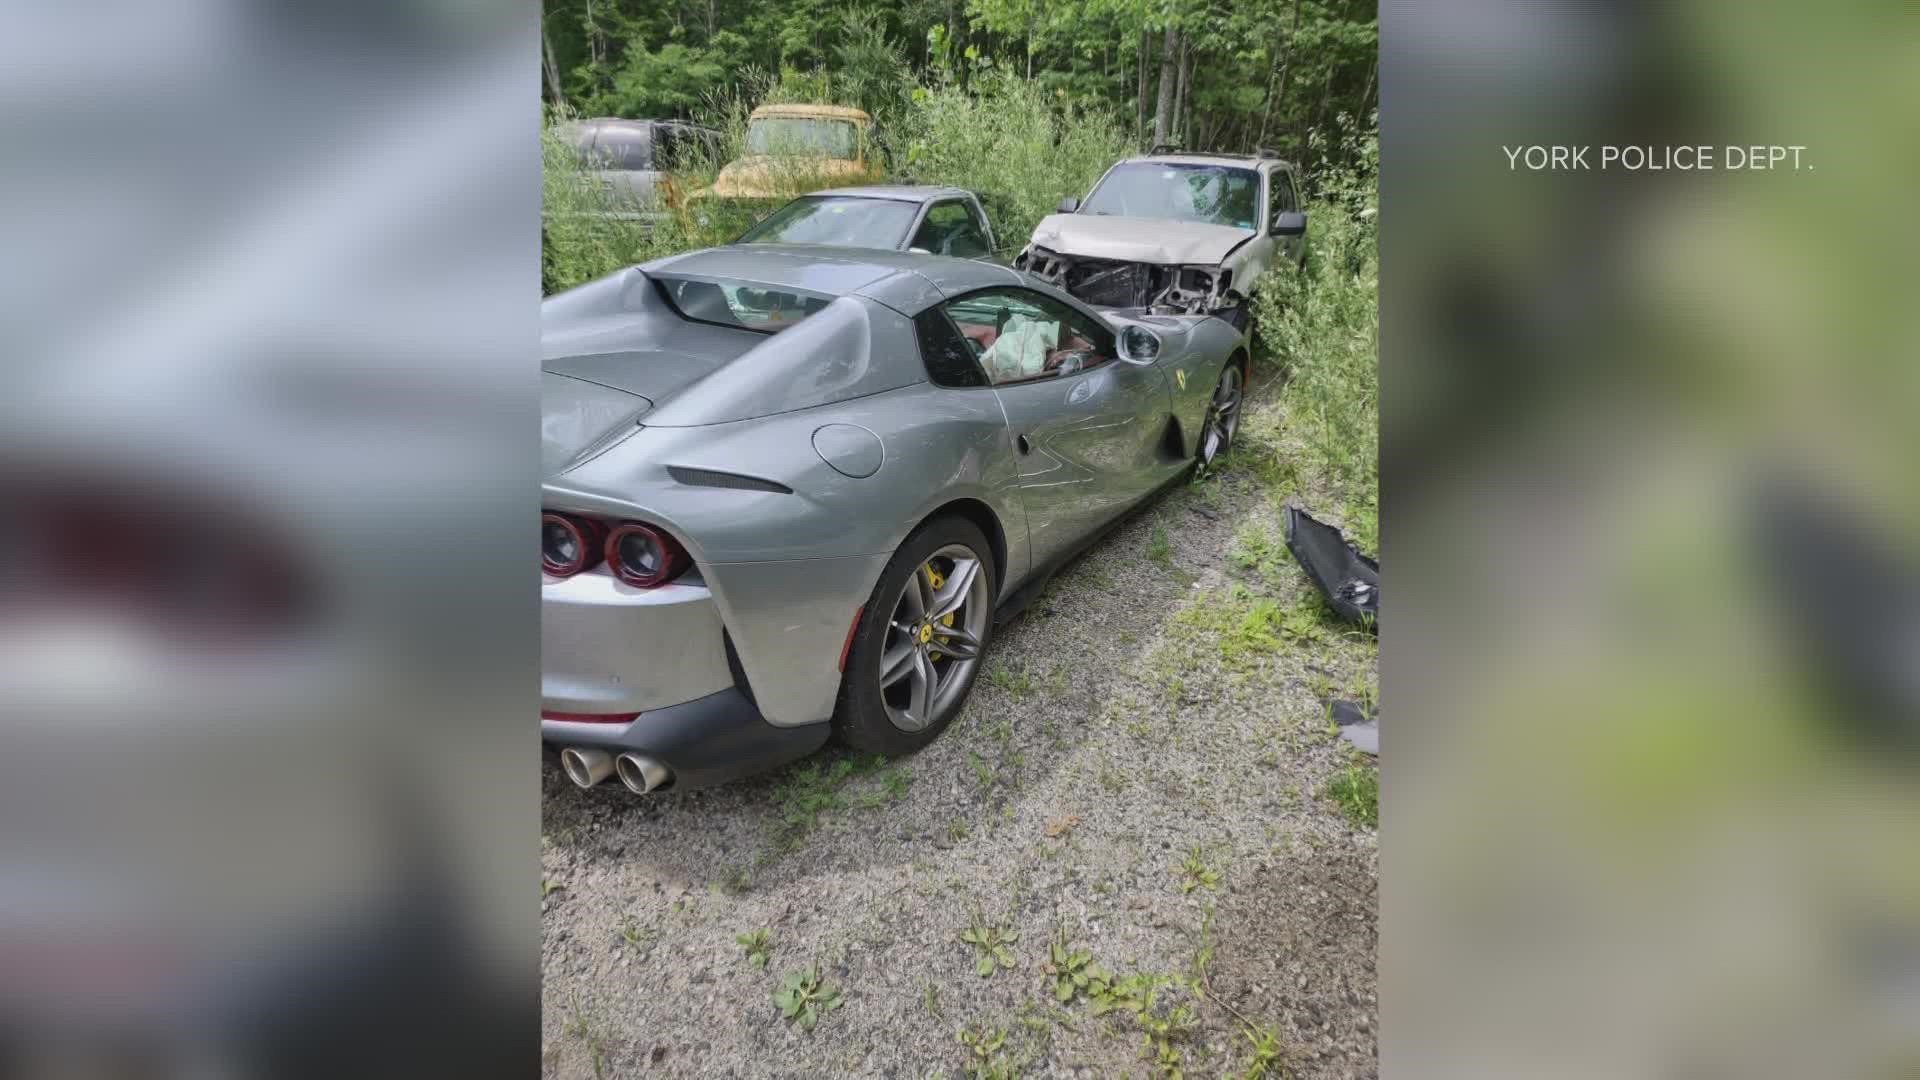 The 2021 Ferrari is valued at over $400,000, according to the York Police Department.